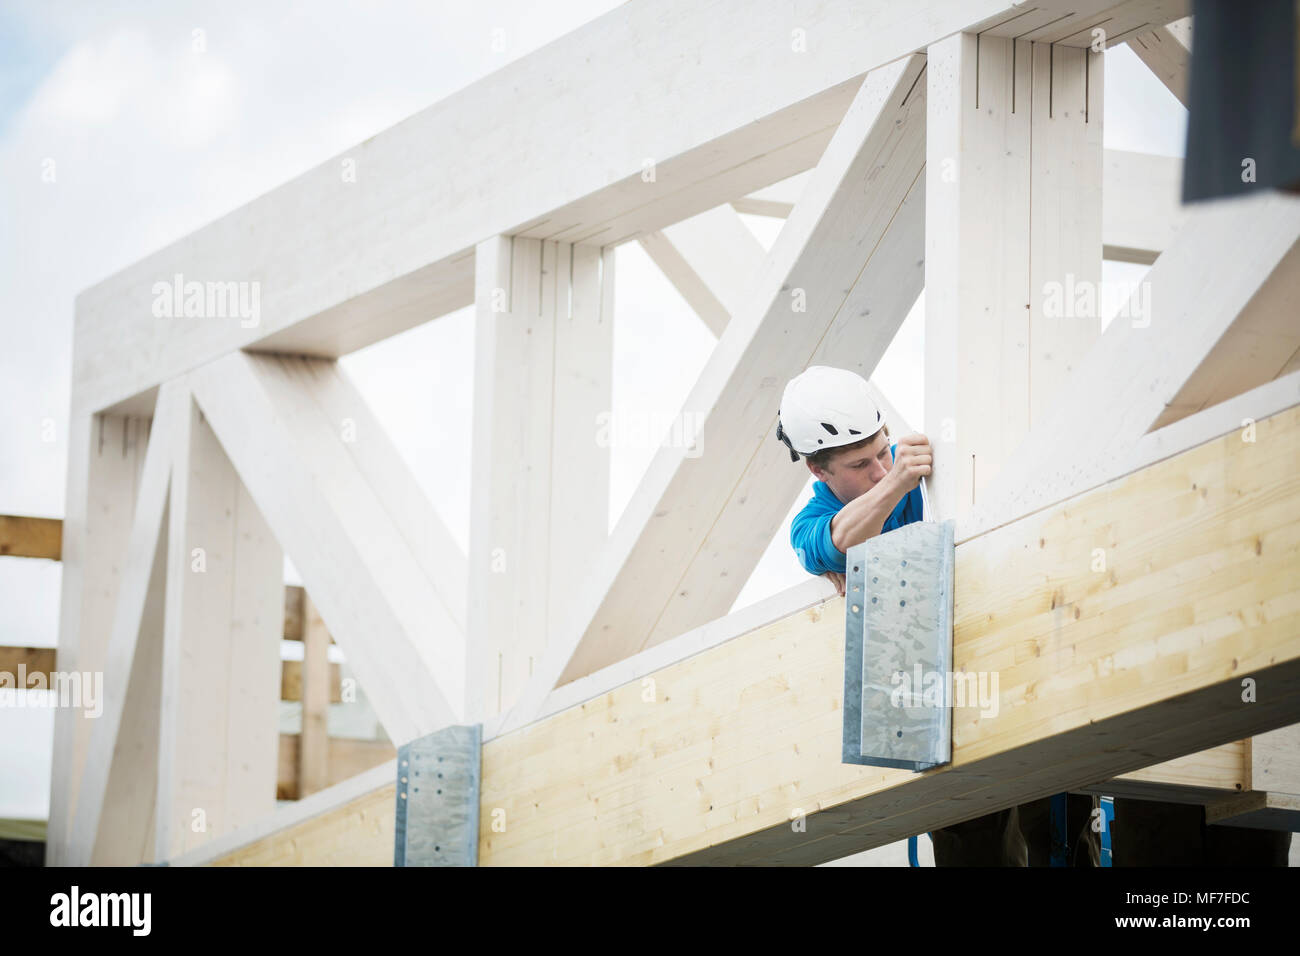 Austria, worker fixing roof construction Stock Photo